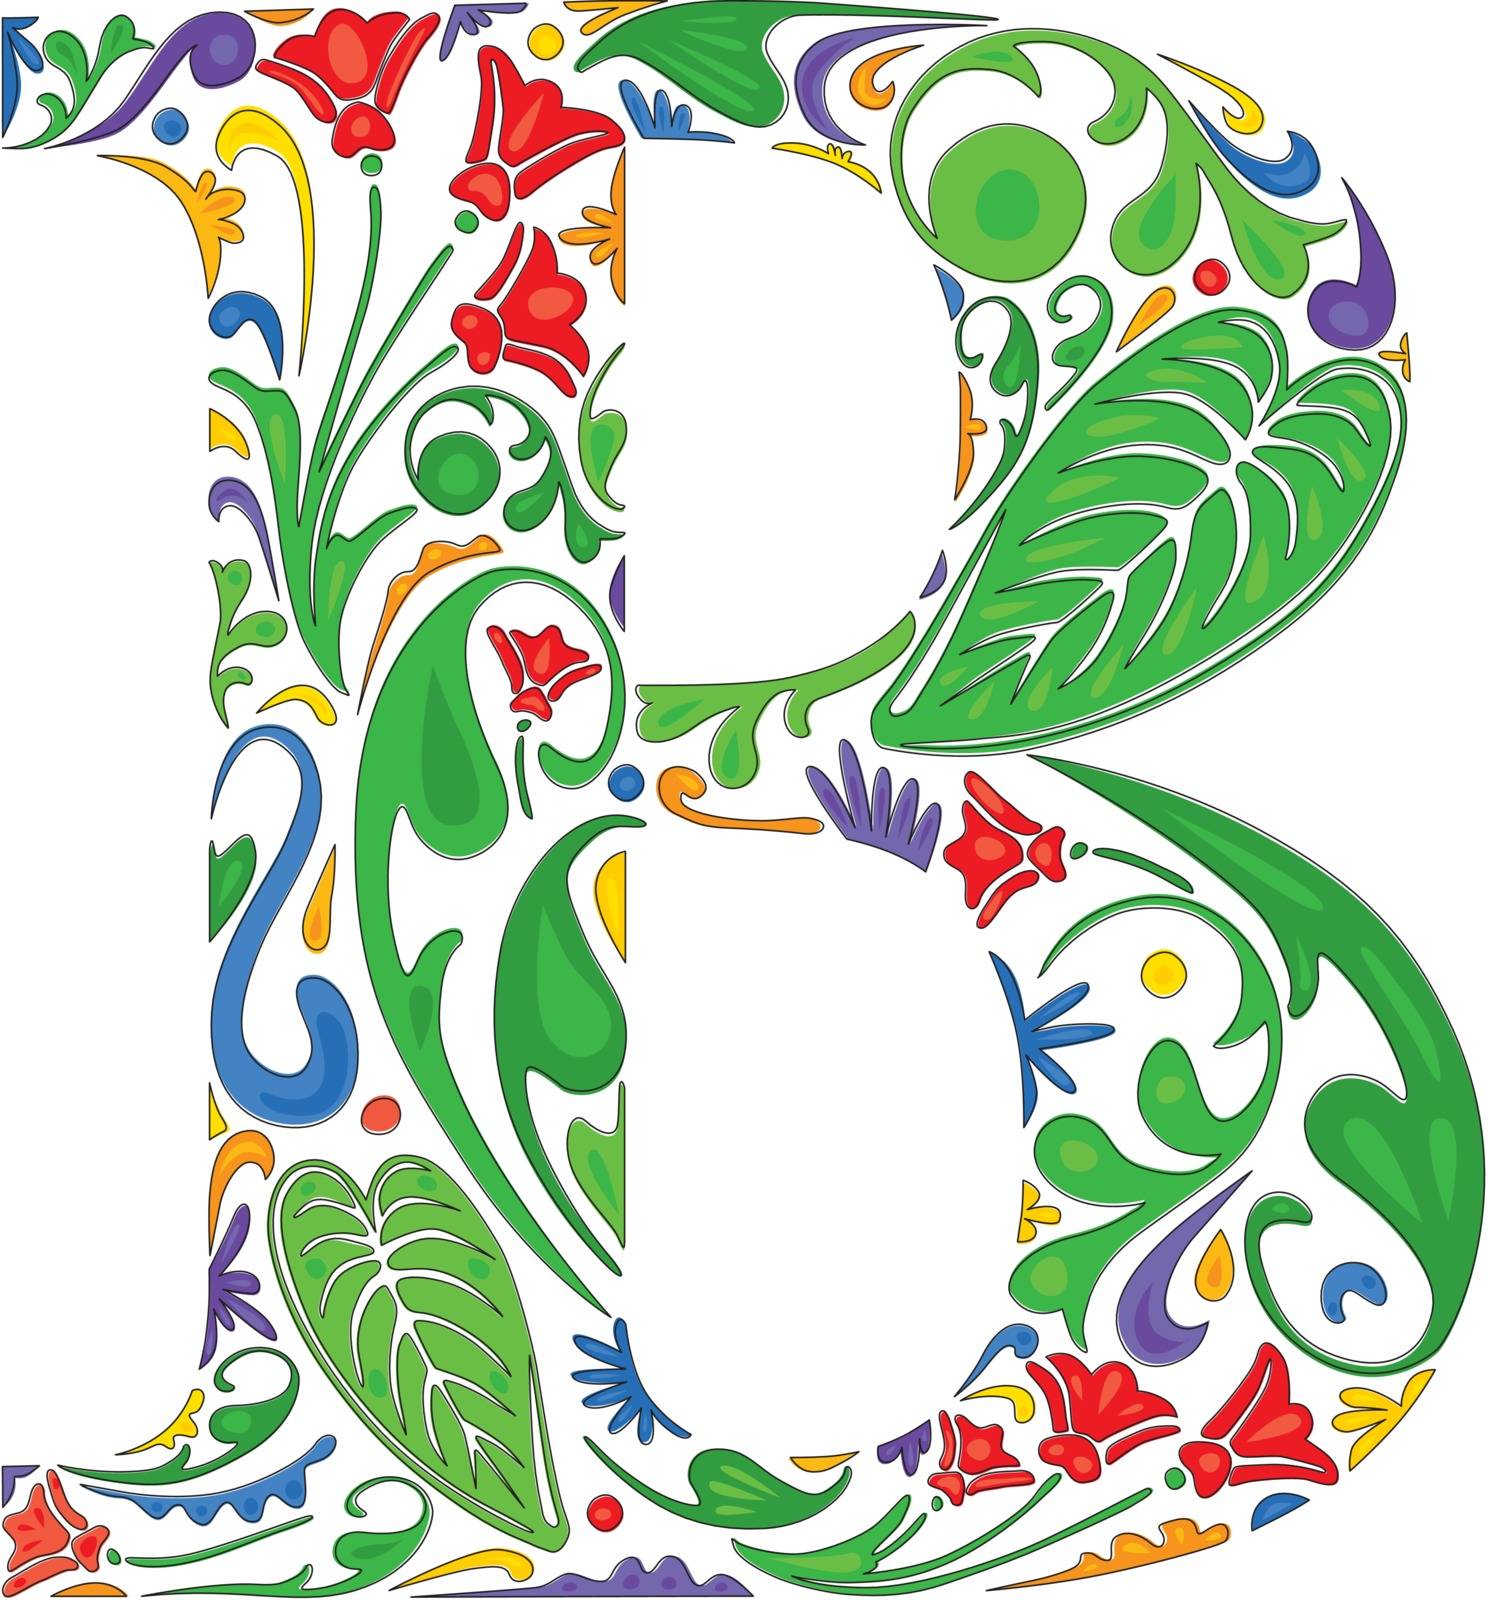 Colorful floral initial capital letter B